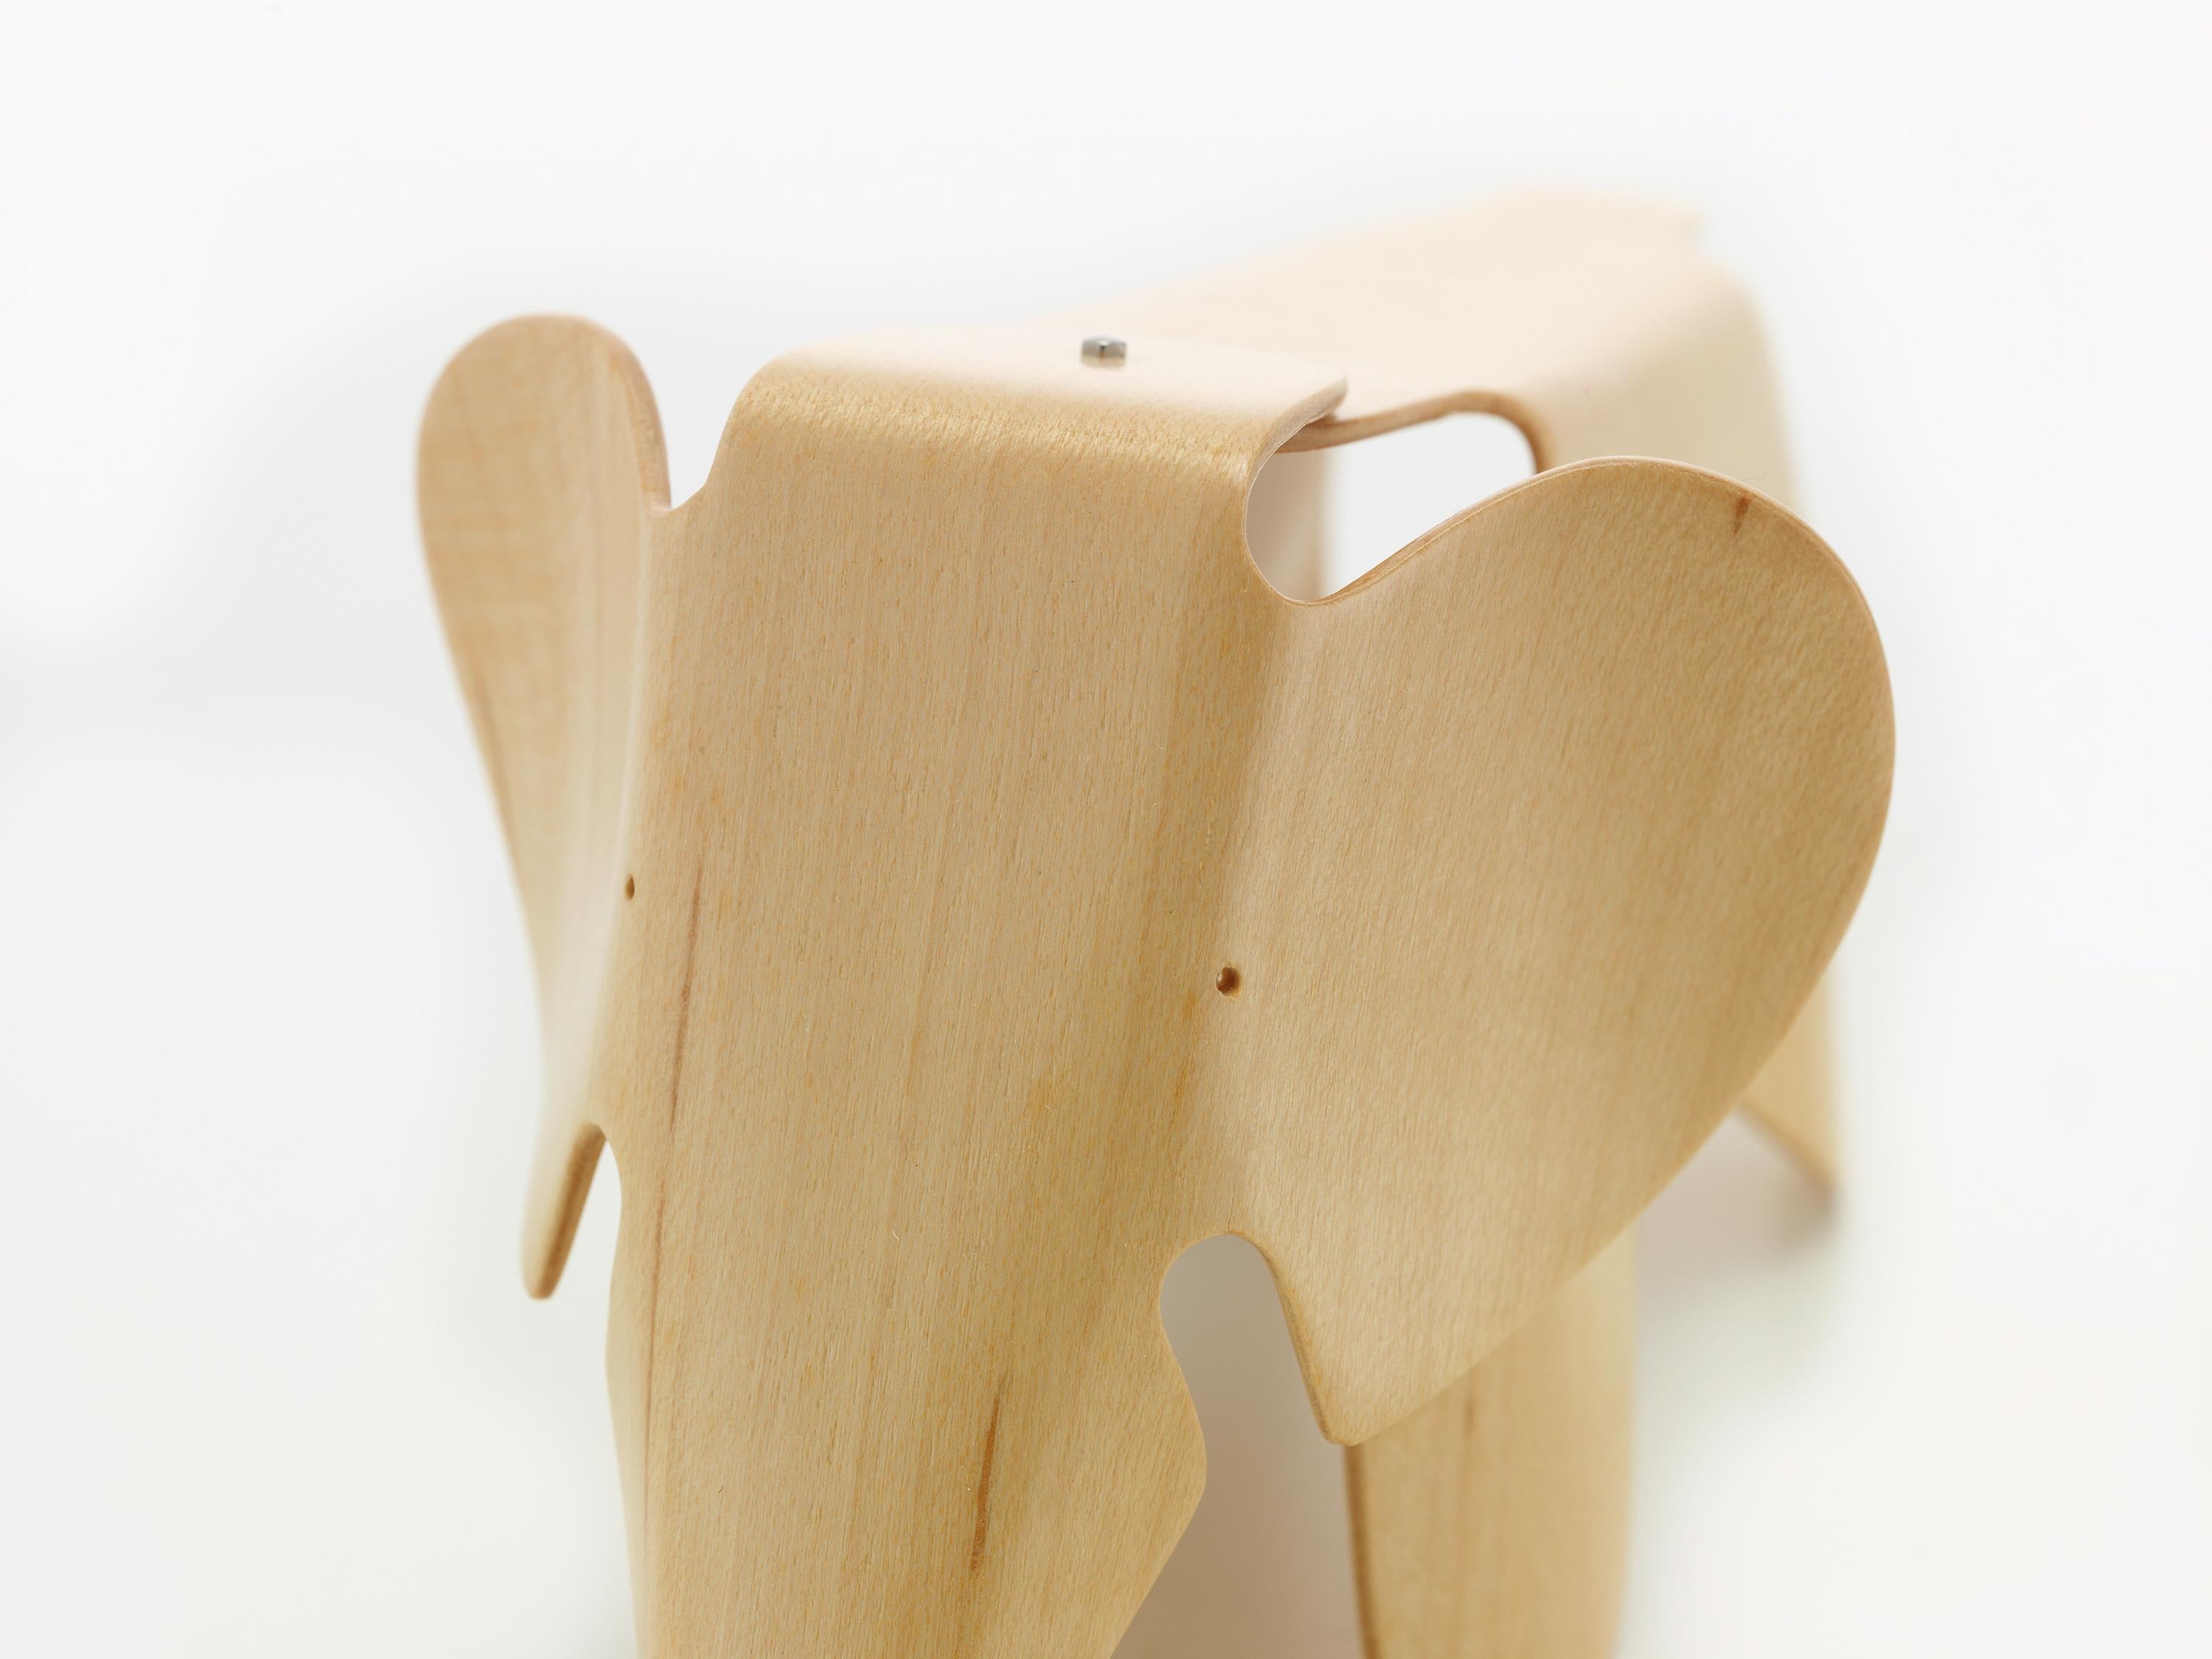 These items are currently only available in the United States.

The plywood elephant holds a prominent place among the plywood pieces designed by the Eameses. In the early 1940s Charles and Ray Eames successfully developed an innovative method for